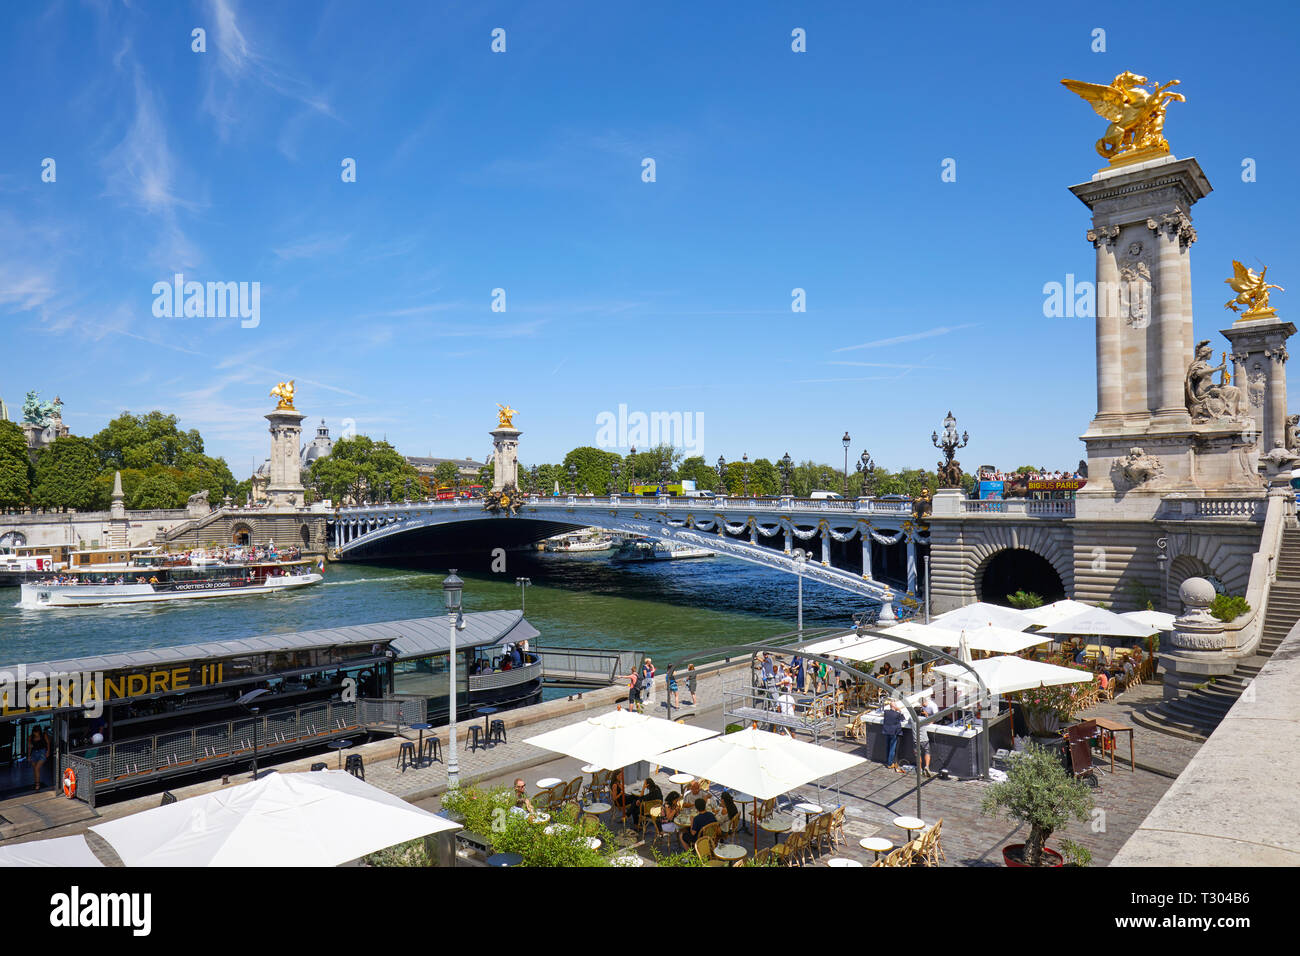 PARIS, FRANCE - JULY 21, 2017: Alexander III bridge and cafe in docks area in a sunny summer day, blue sky in Paris, France. Stock Photo